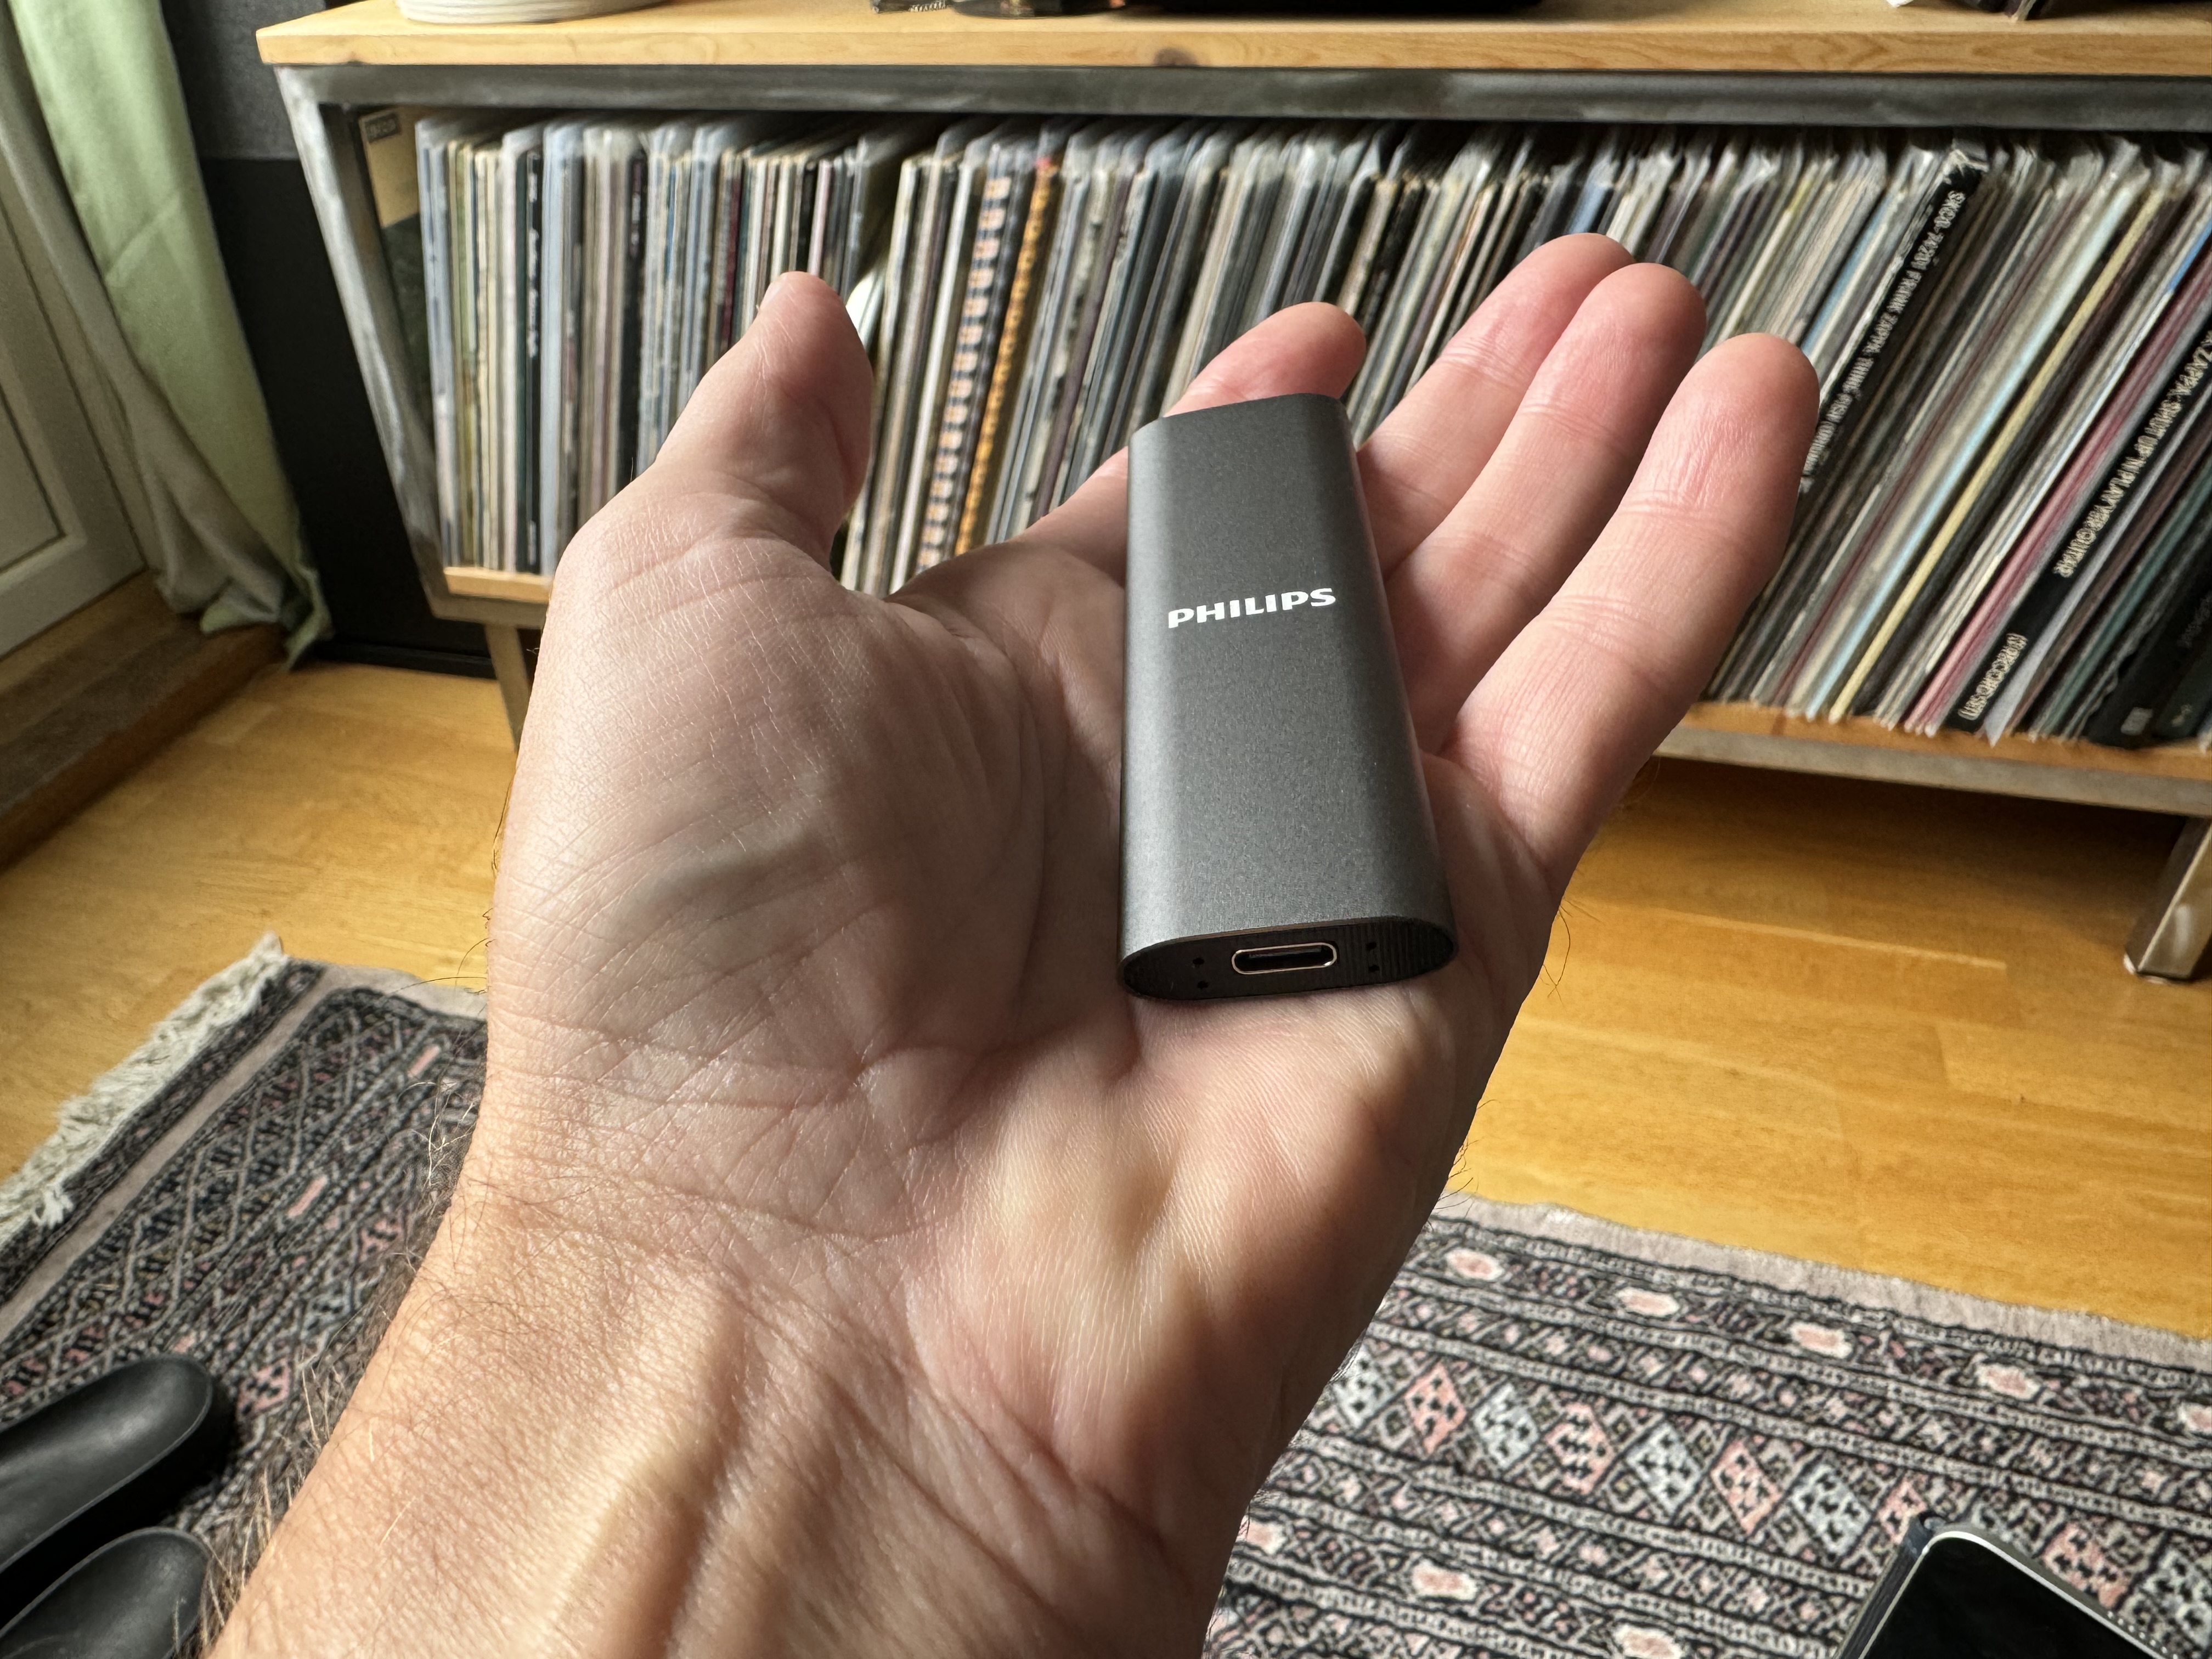 Philips Portable Externe SSD 250 GB